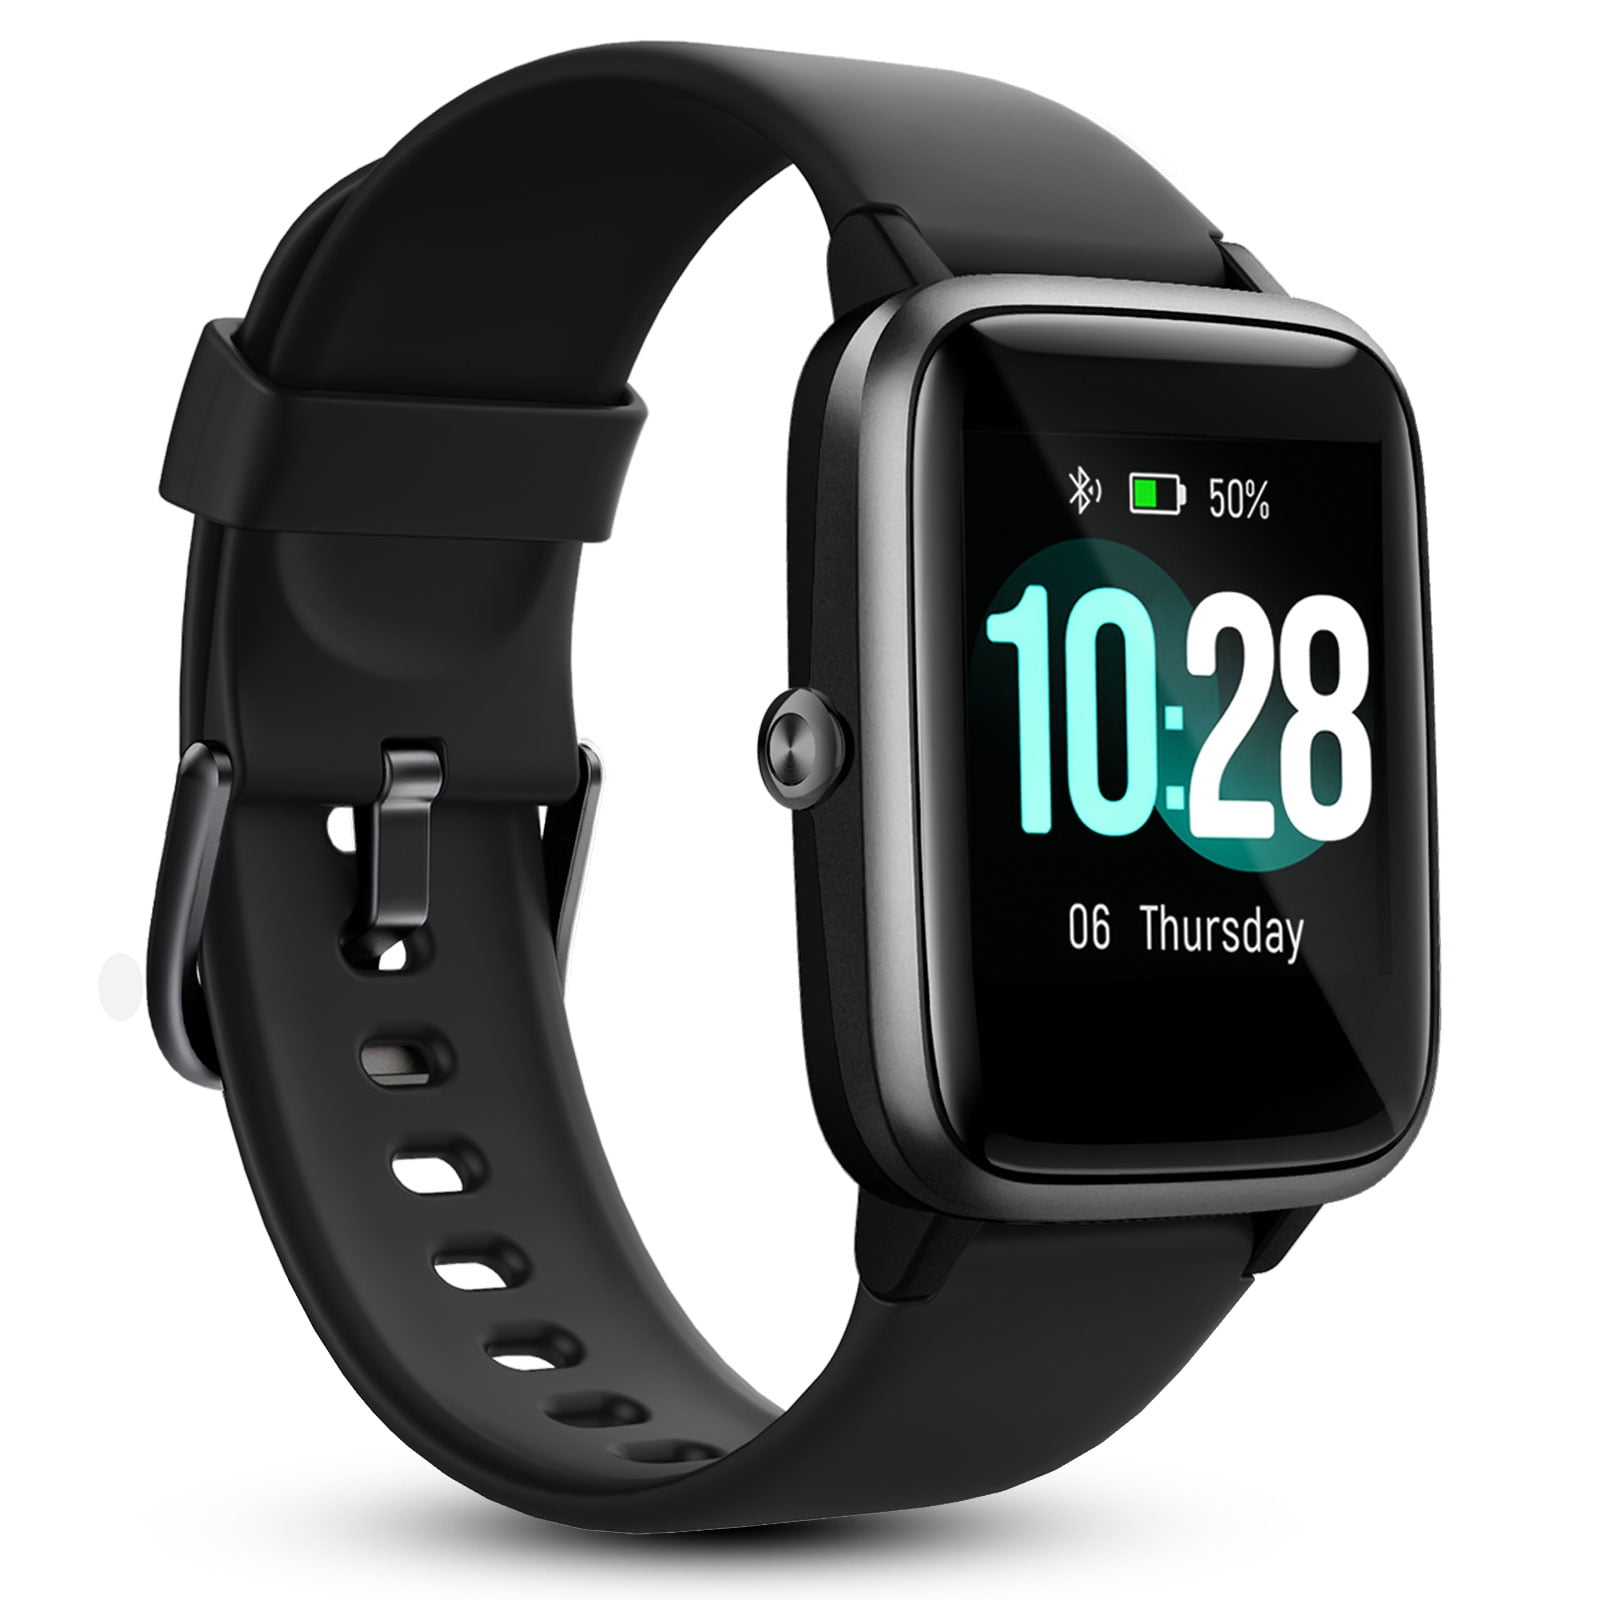 Smartwatch B1 Bluetooth Uhr Curved Display Android iOS Samsung iPhone Huawei IP 